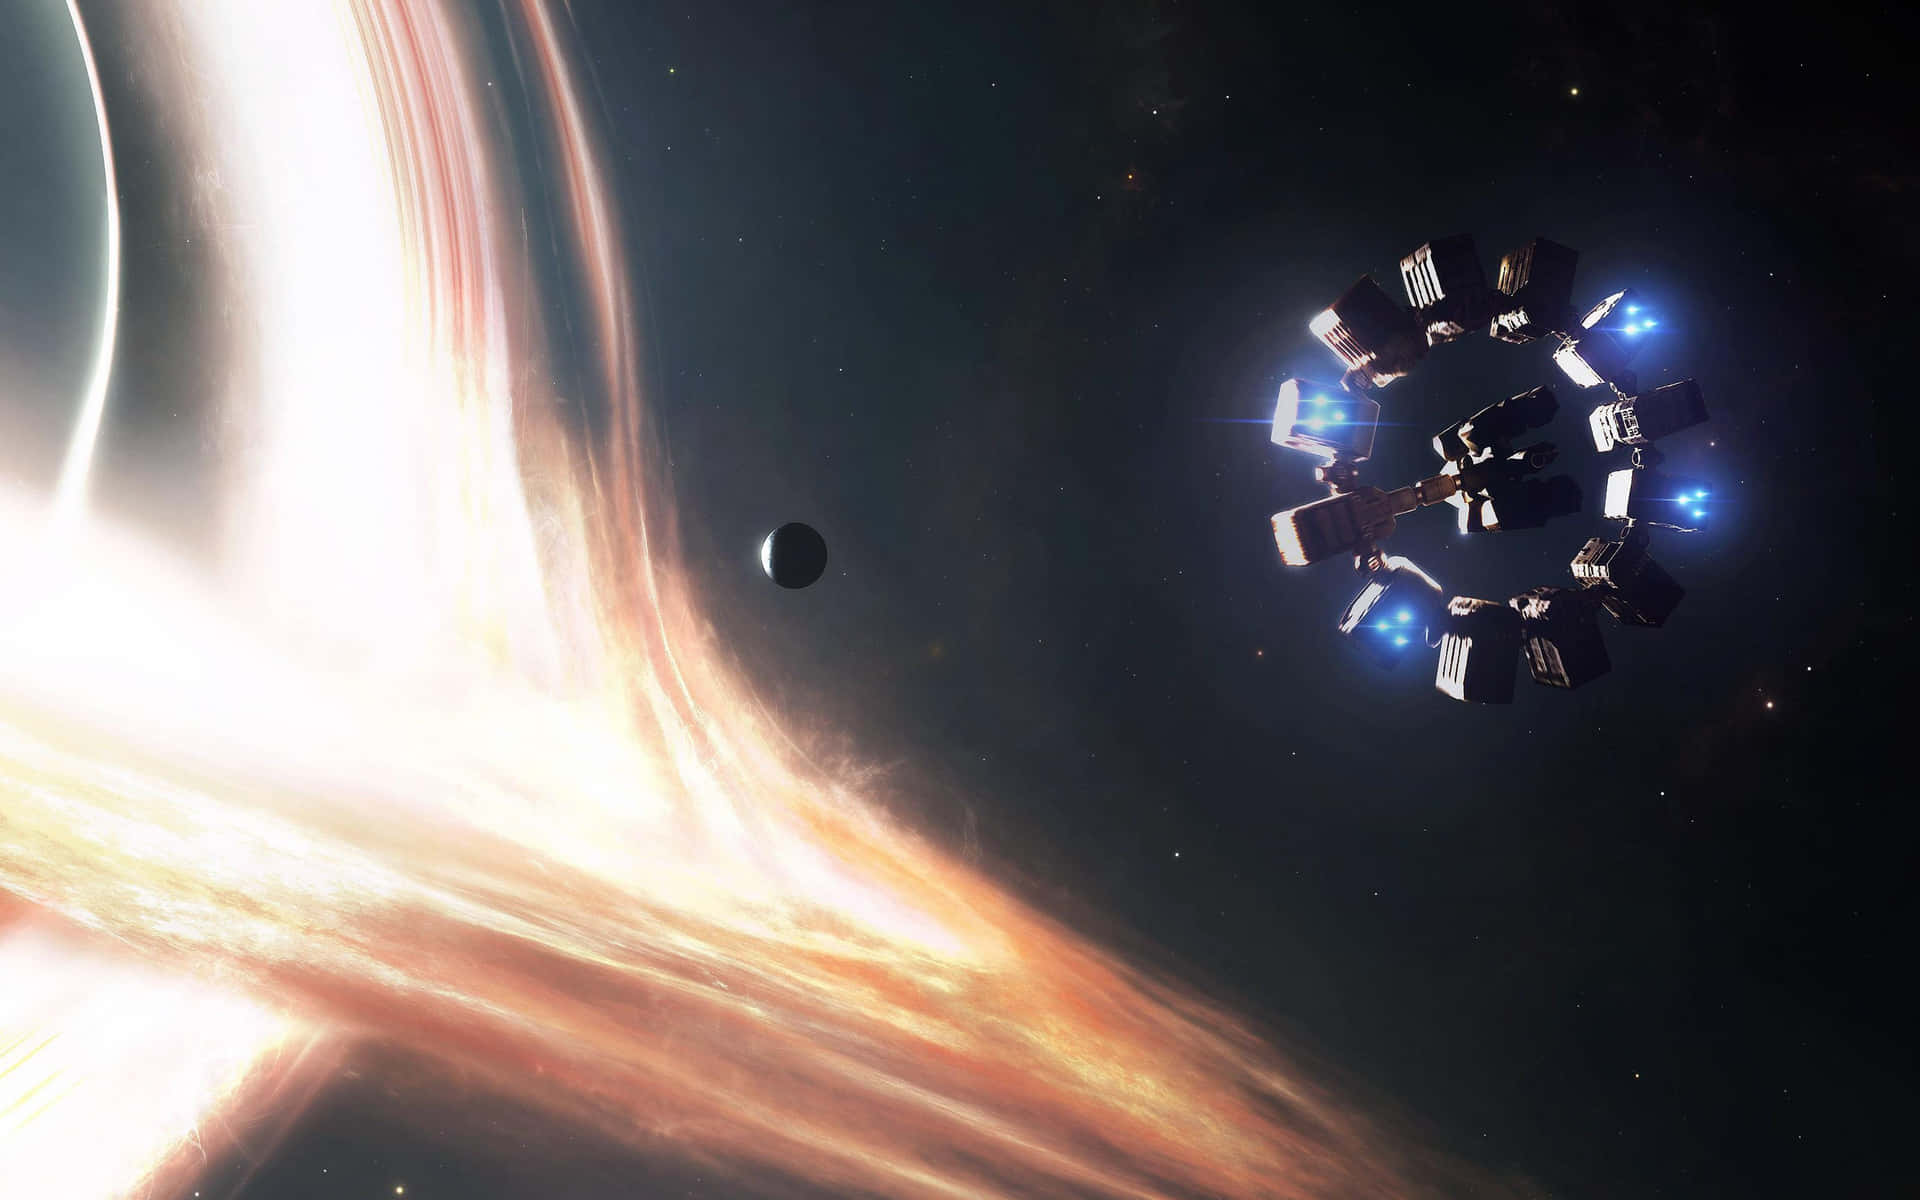 A View Of The Black Hole From The Movie Interstellar Wallpaper